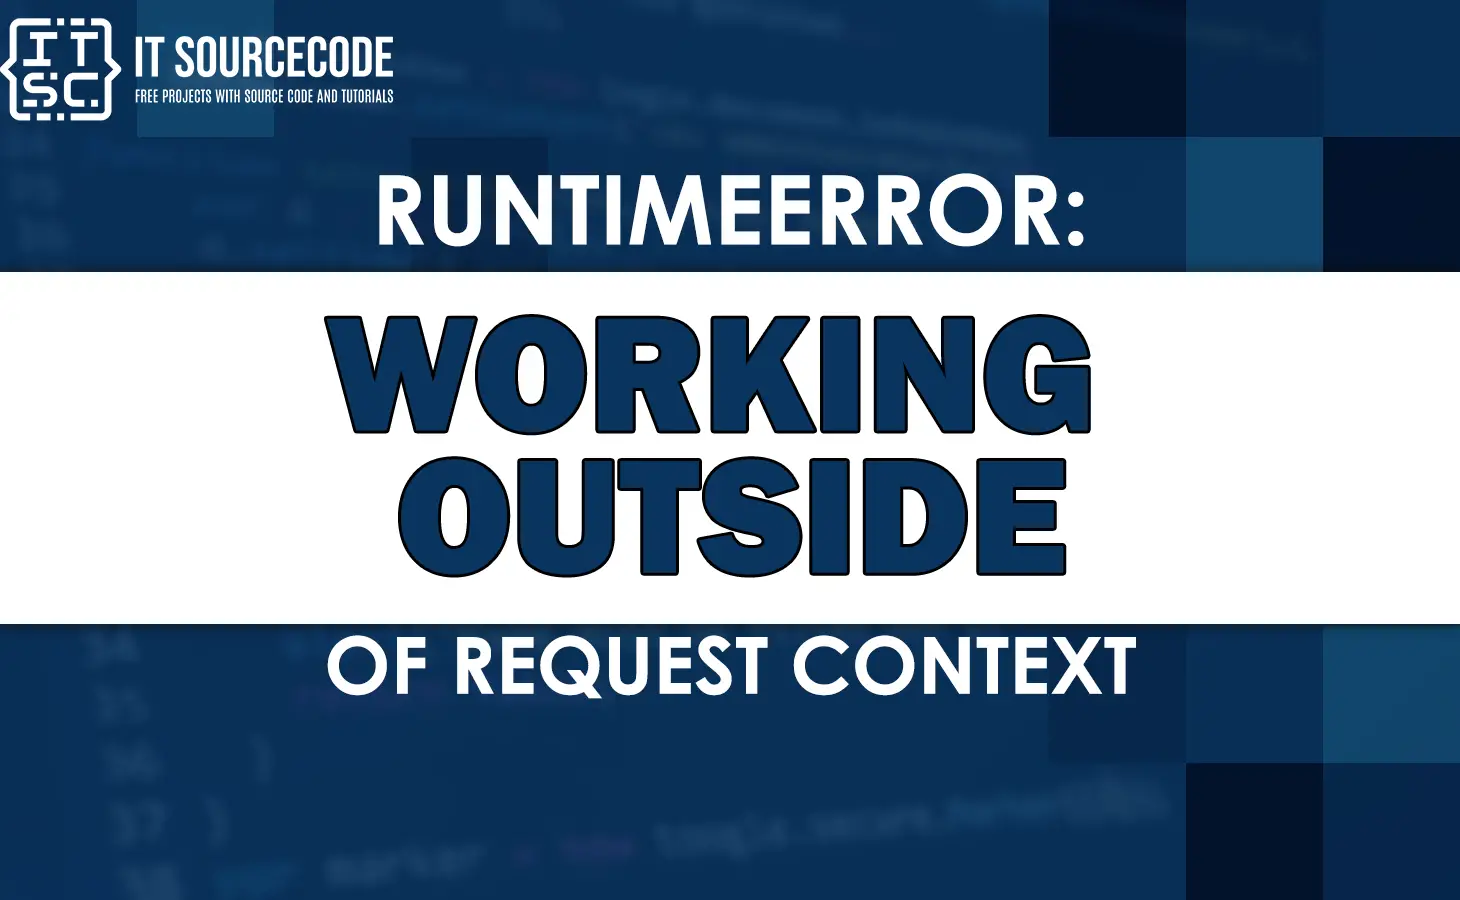 runtimeerror working outside of request context